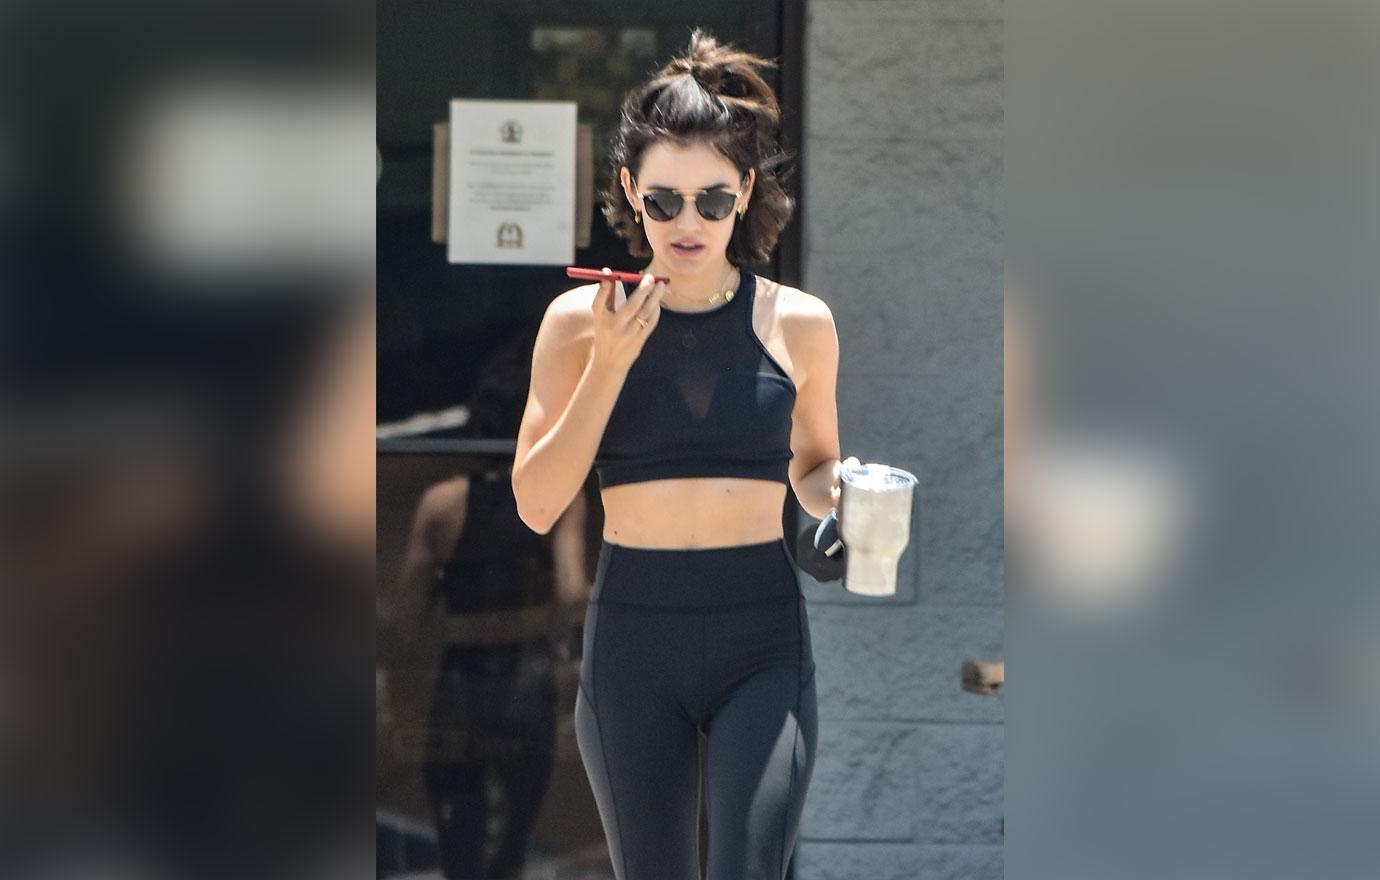 Lucy Hale displays her fit body in a sports bra and leggings as she hits the